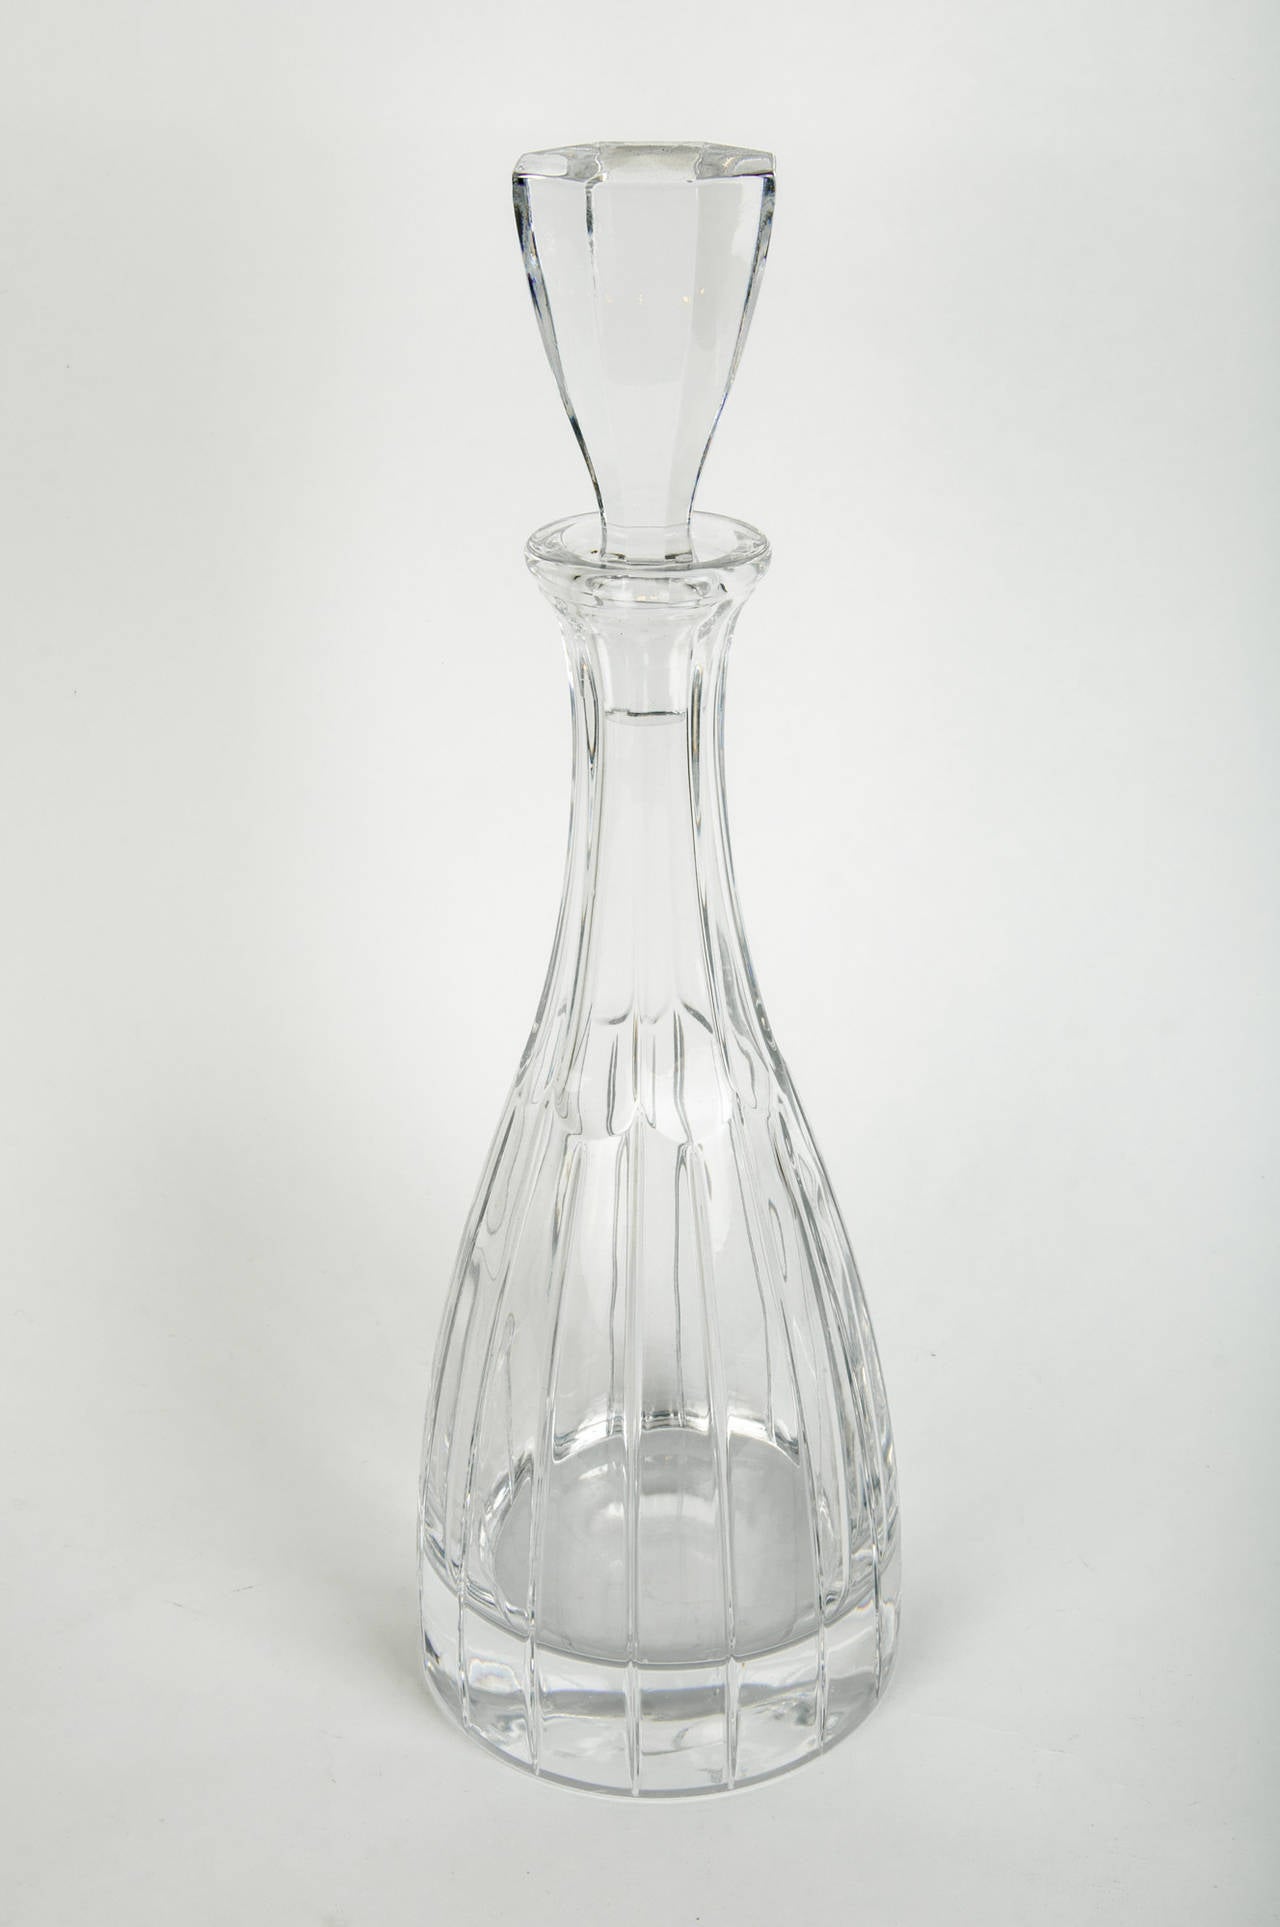 Vintage cut crystal Art Deco style drinks decanter with cut crystal lid. The decanter is in excellent vintage condition, this would bring a great addition to any bar or table. The decanter measure about 14 inches with topper and 5 inches diameter.